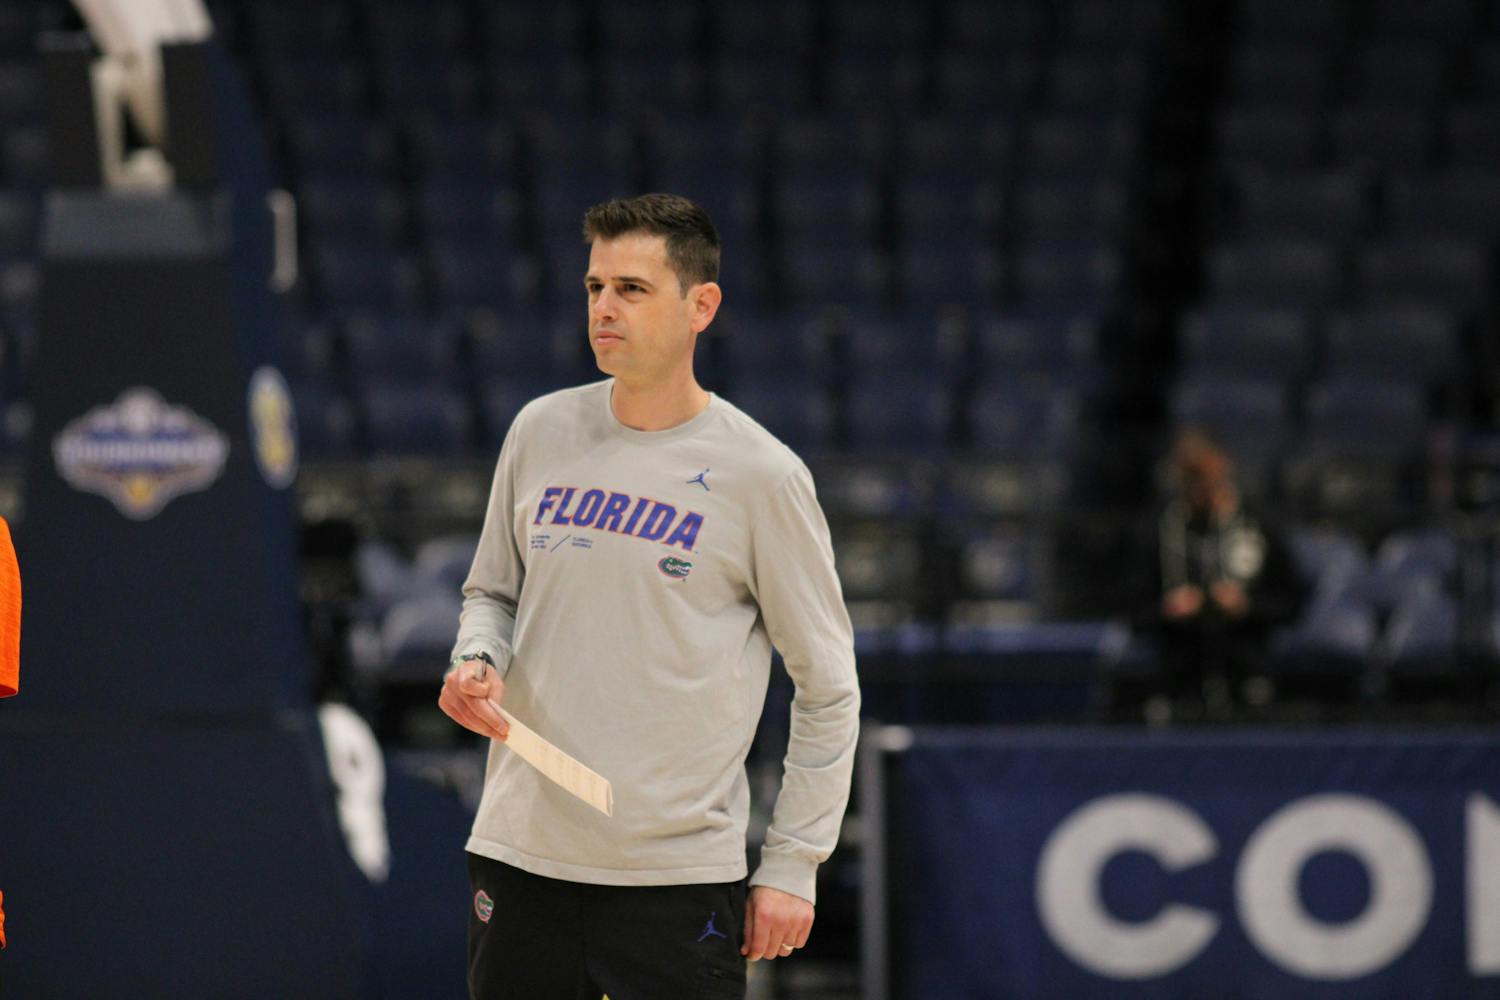 Florida head coach Todd Golden stands on the court during the Gators' practice the day before their Southeastern Conference tournament game Wednesday, March 8, 2023.